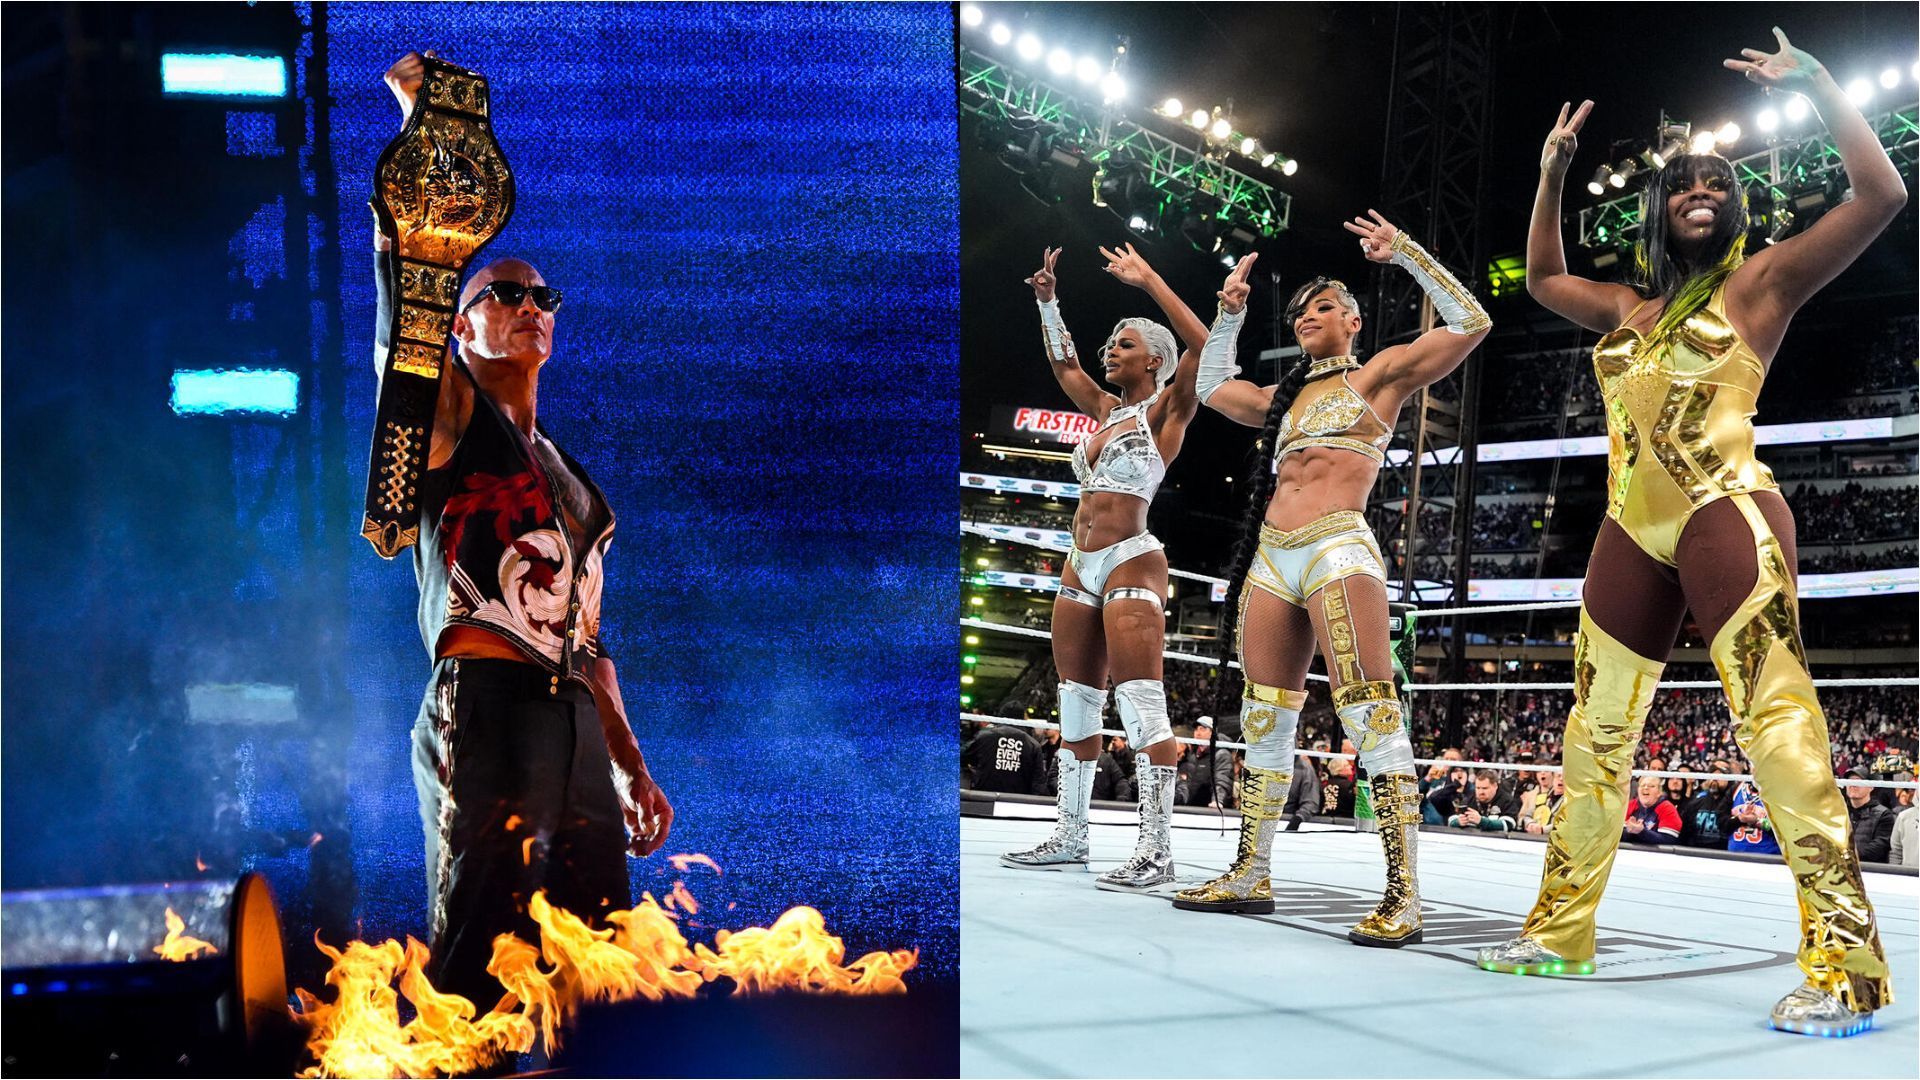 WrestleMania XL set up some epic feuds for the future [Images courtesy of WWE.com]